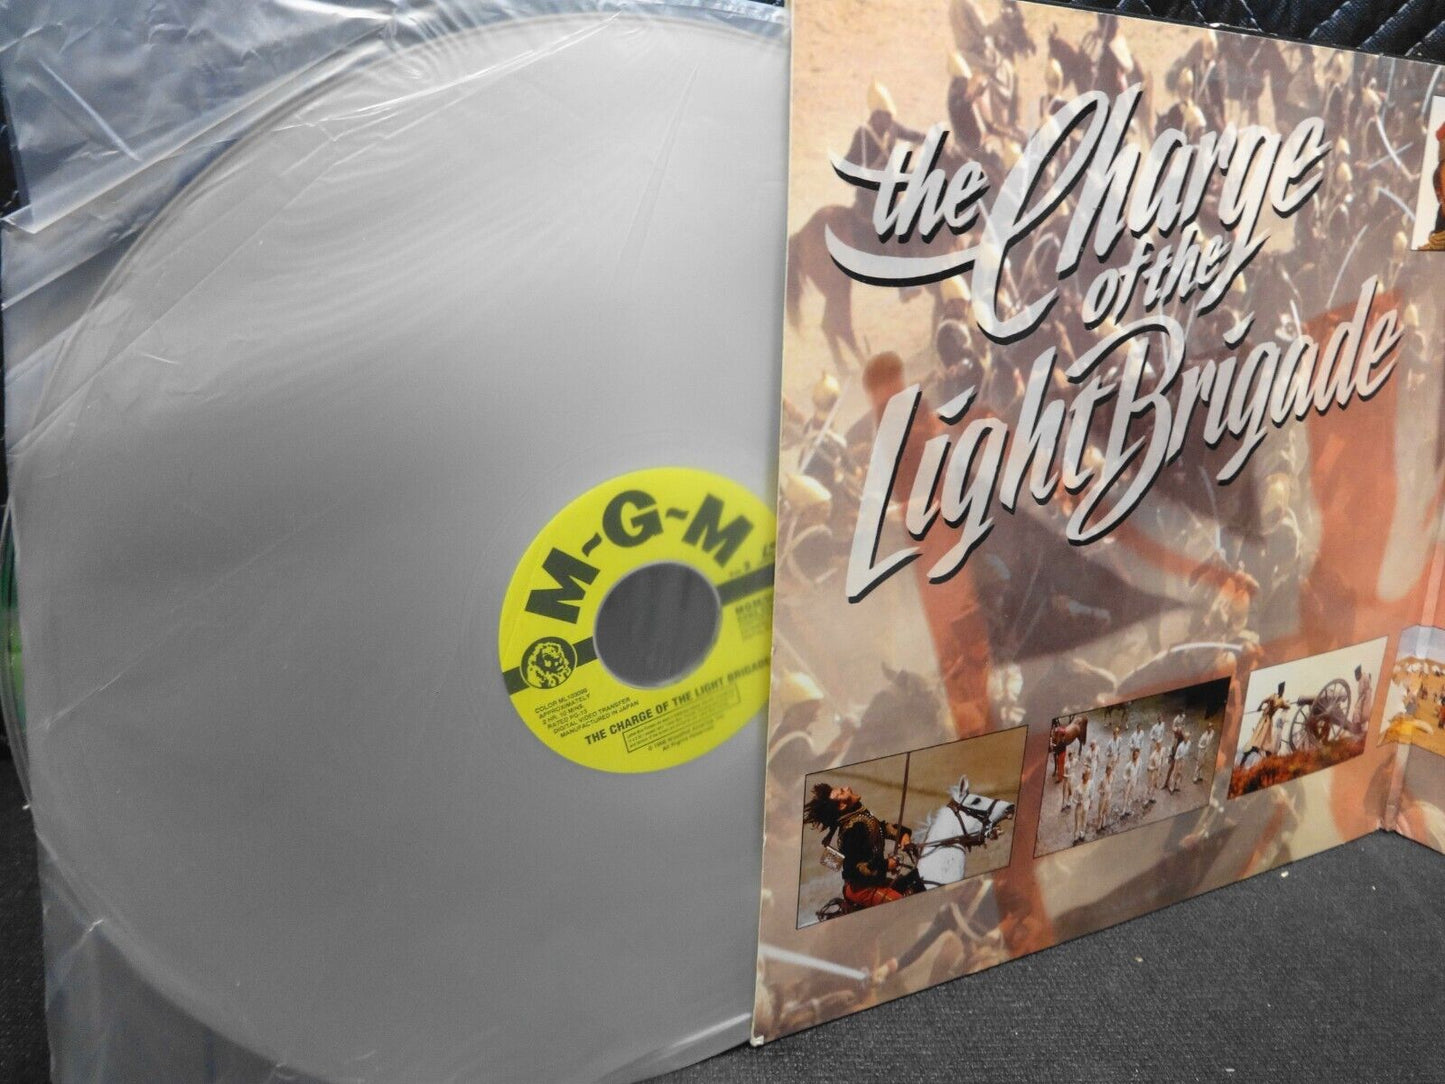 The Charge of the Light Brigade Letterbox Laserdisc LD Trevor Howard